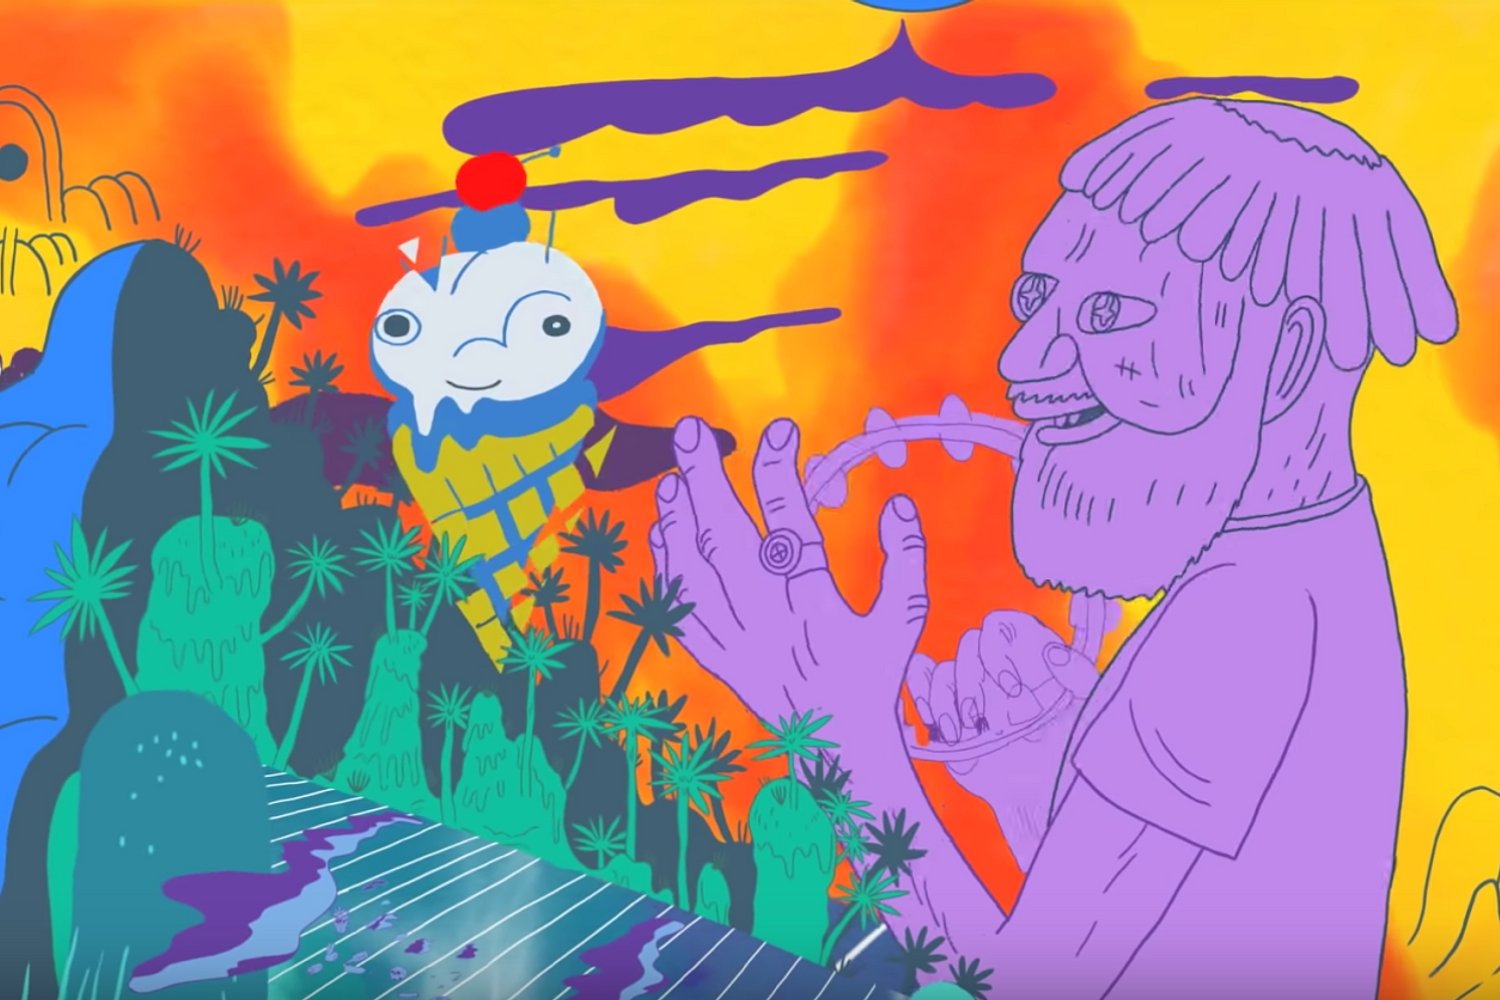 Watch Father John Misty’s animated new video for ‘Date Night’